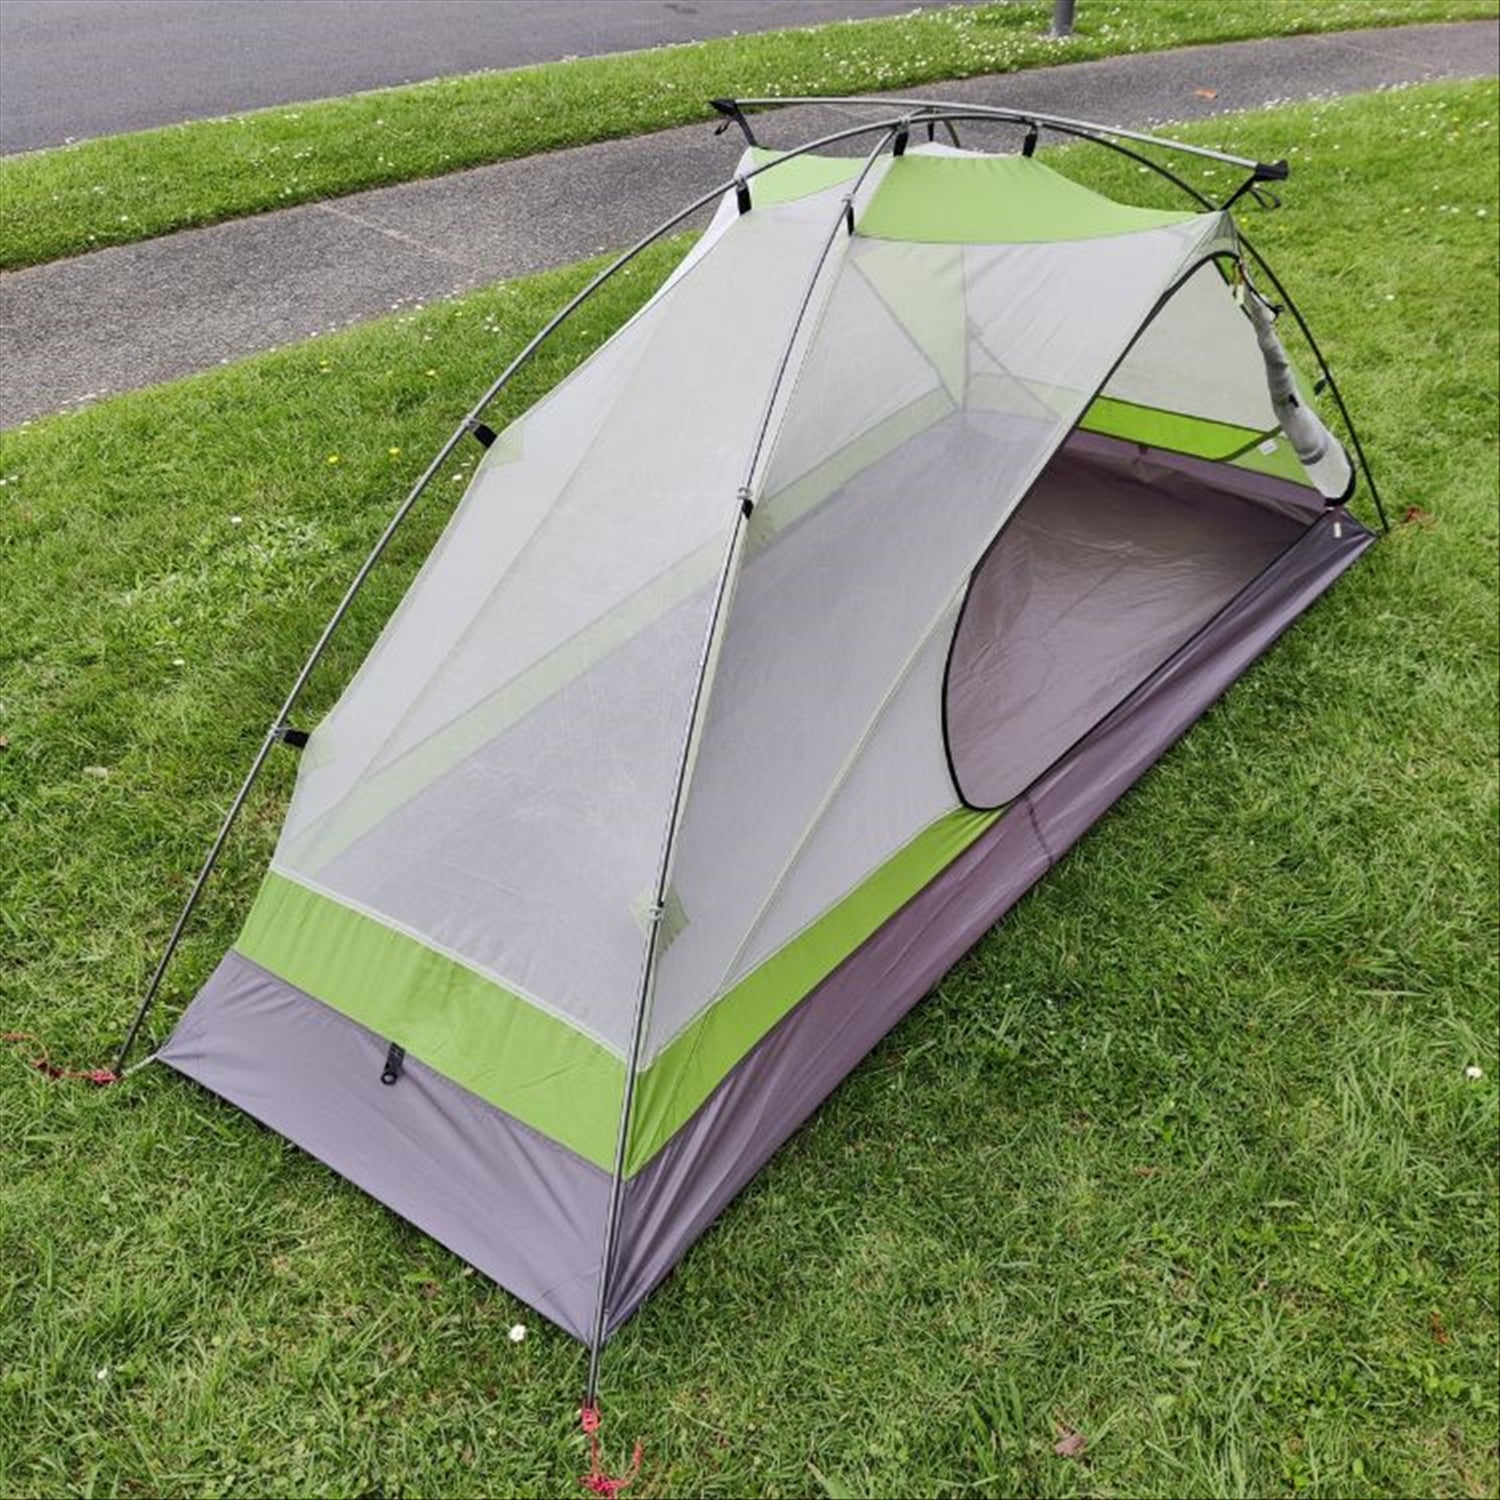 Intents Intents Outdoors MCX 1 - Lightweight 1 Person Tent, 1.95kg